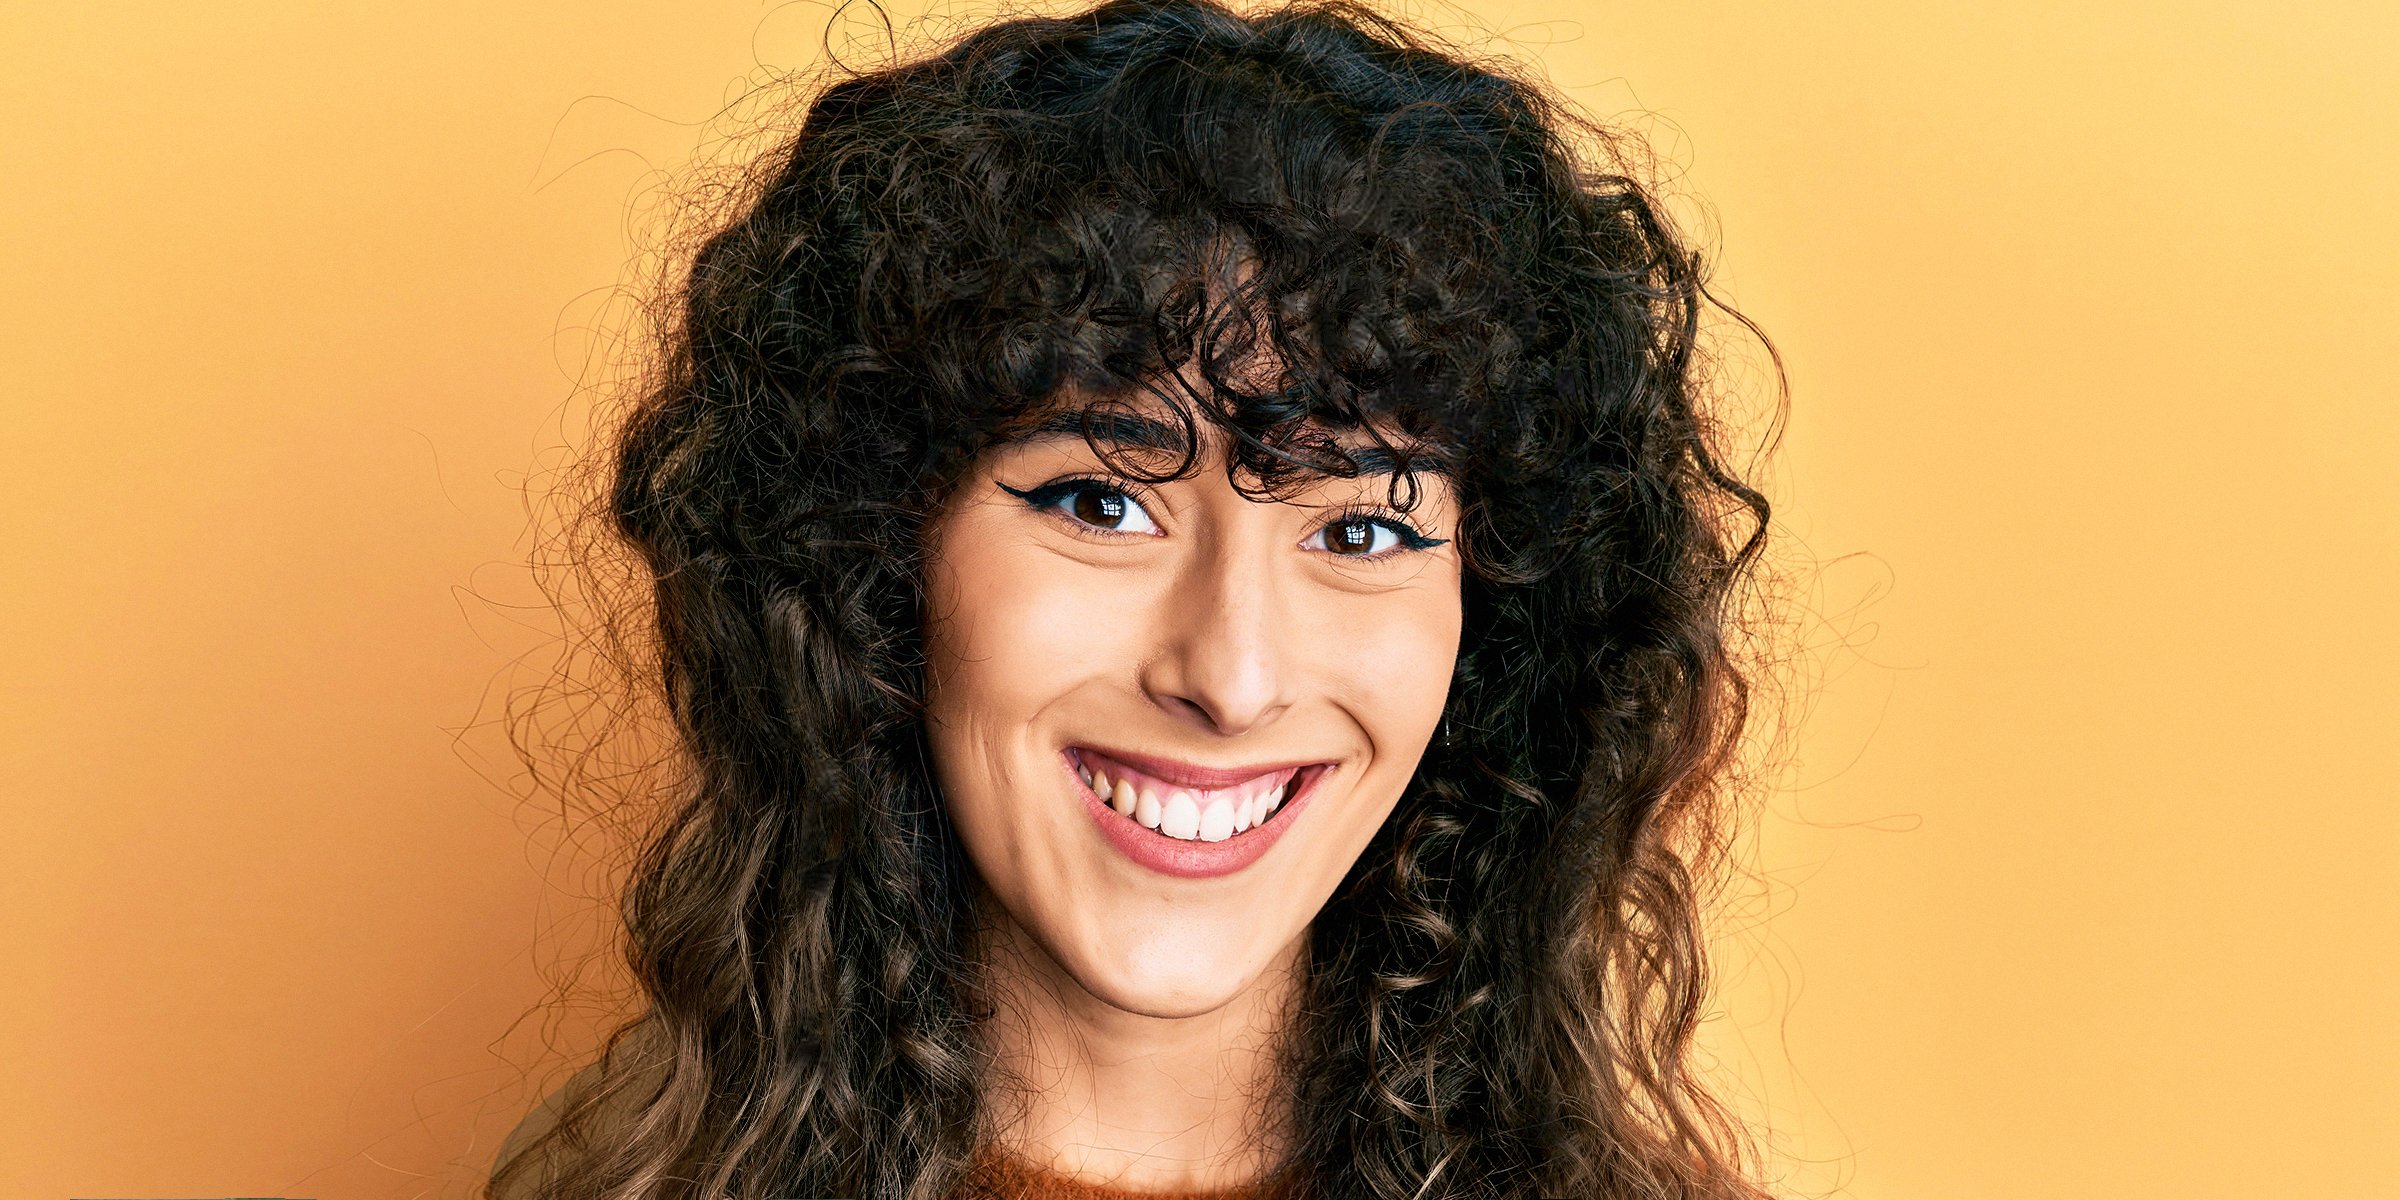 Girl with curly hair. | Source: Shutterstock.com